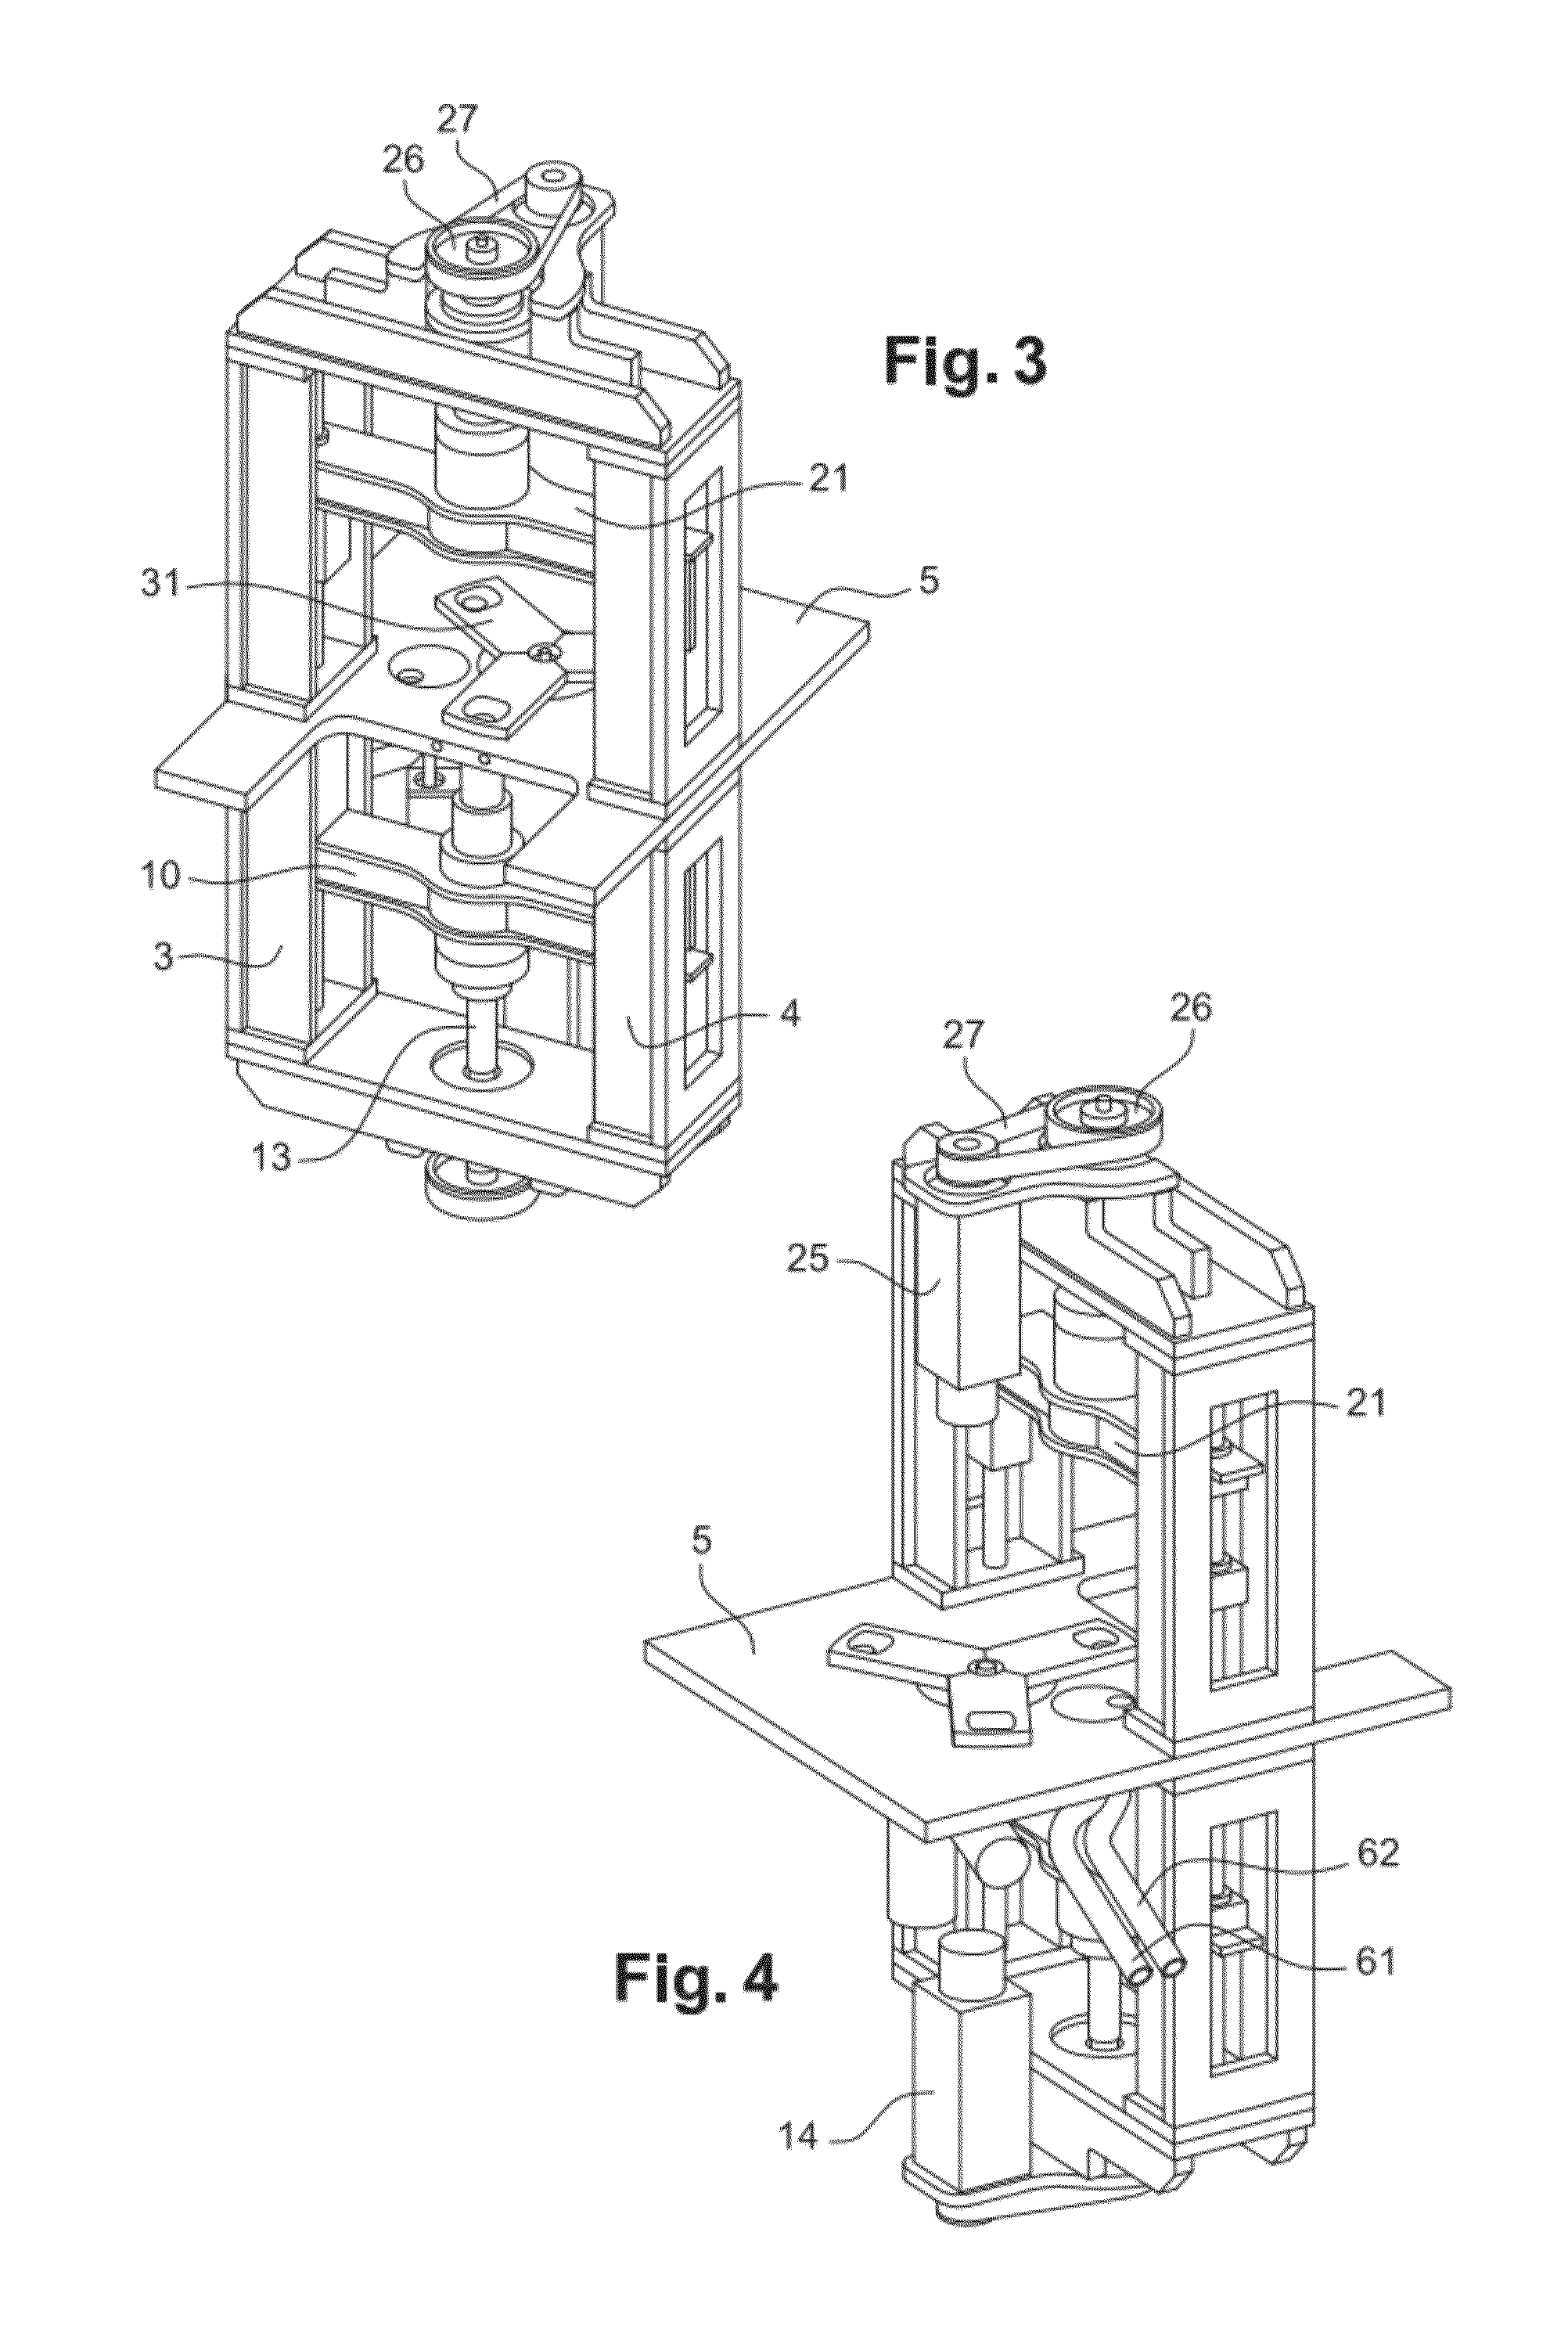 Facility for producing a solid product using one or more powder materials